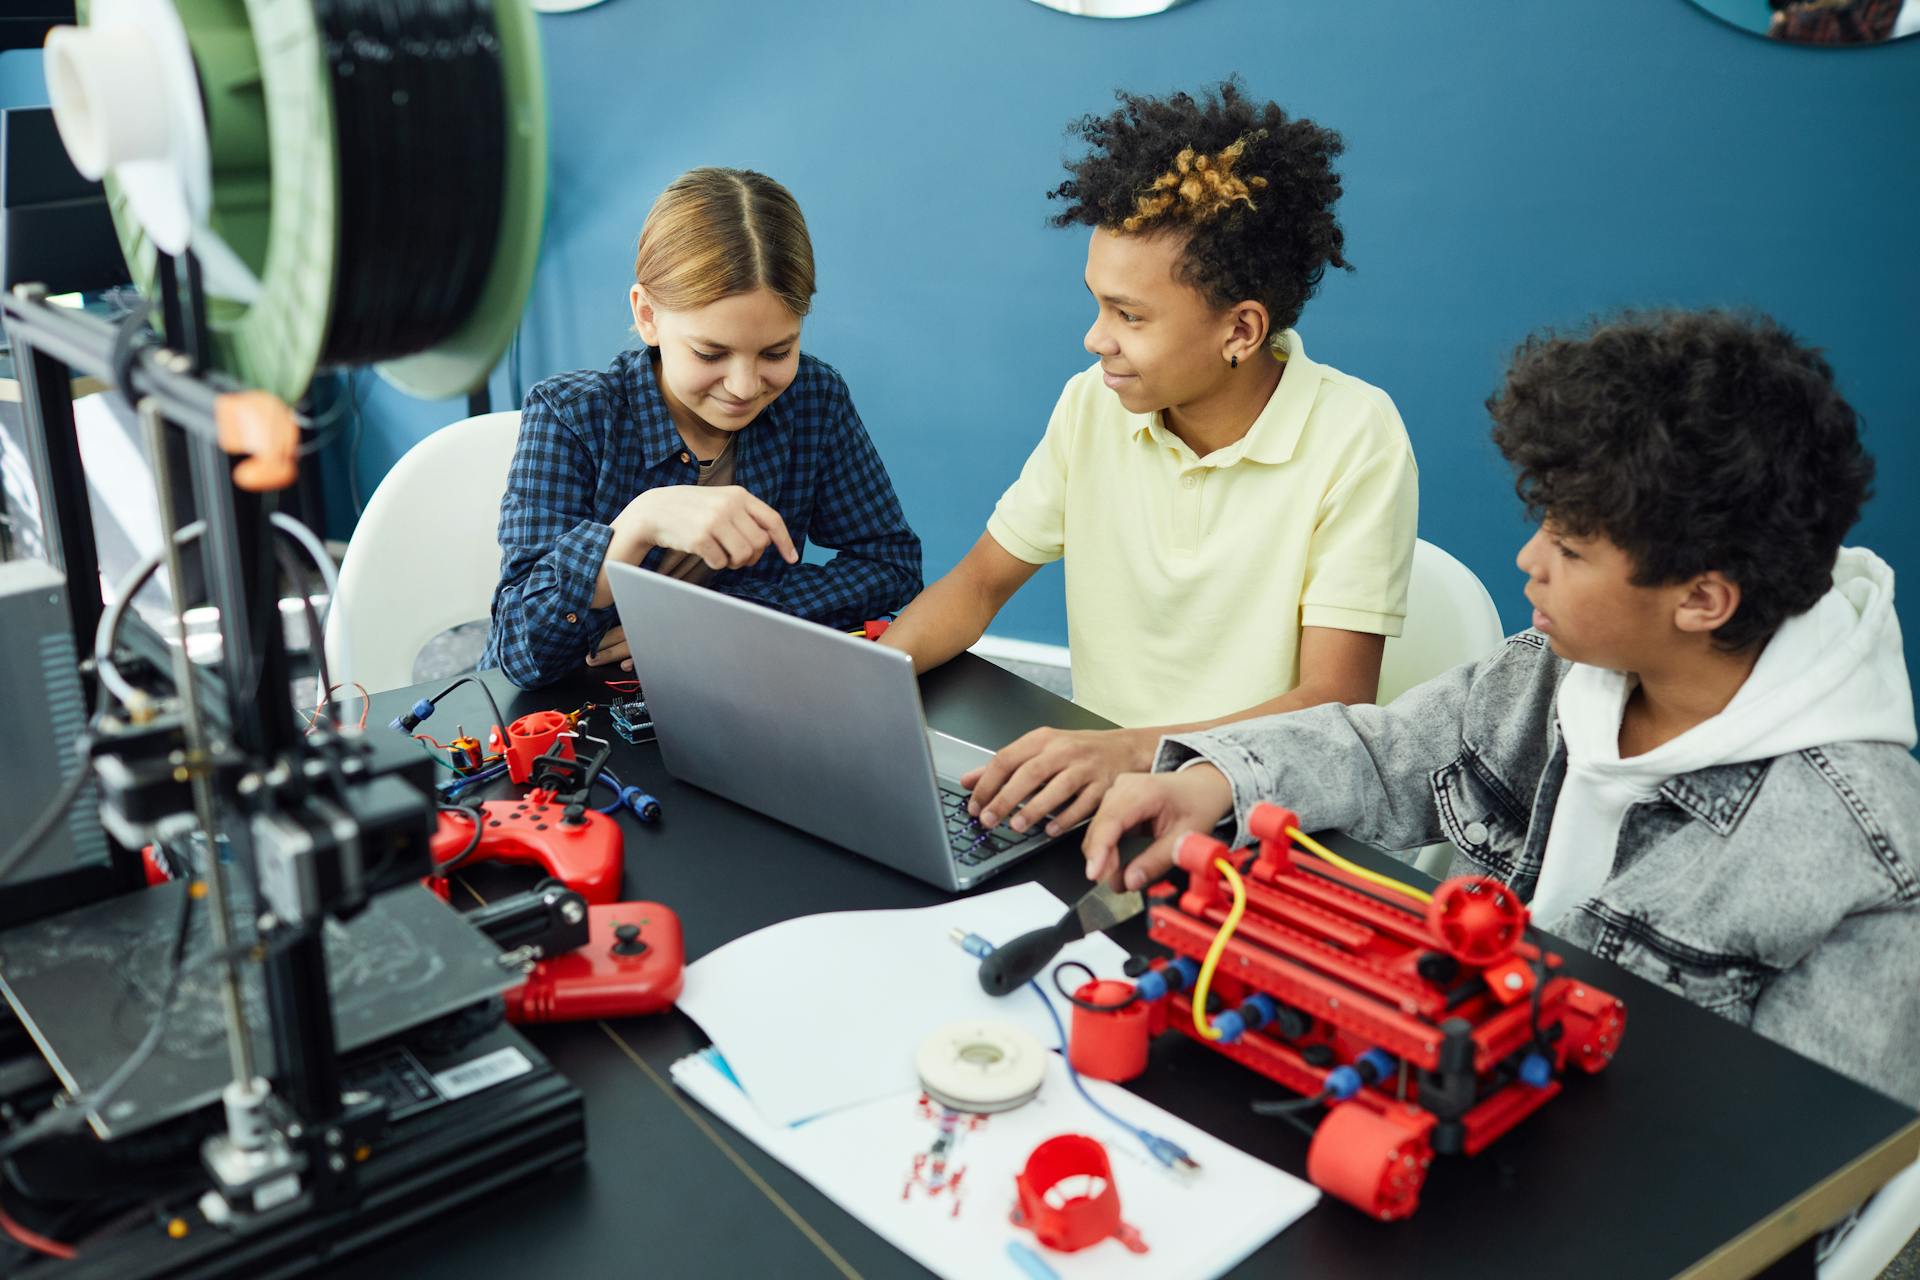 A group of kids working on a 3D printer